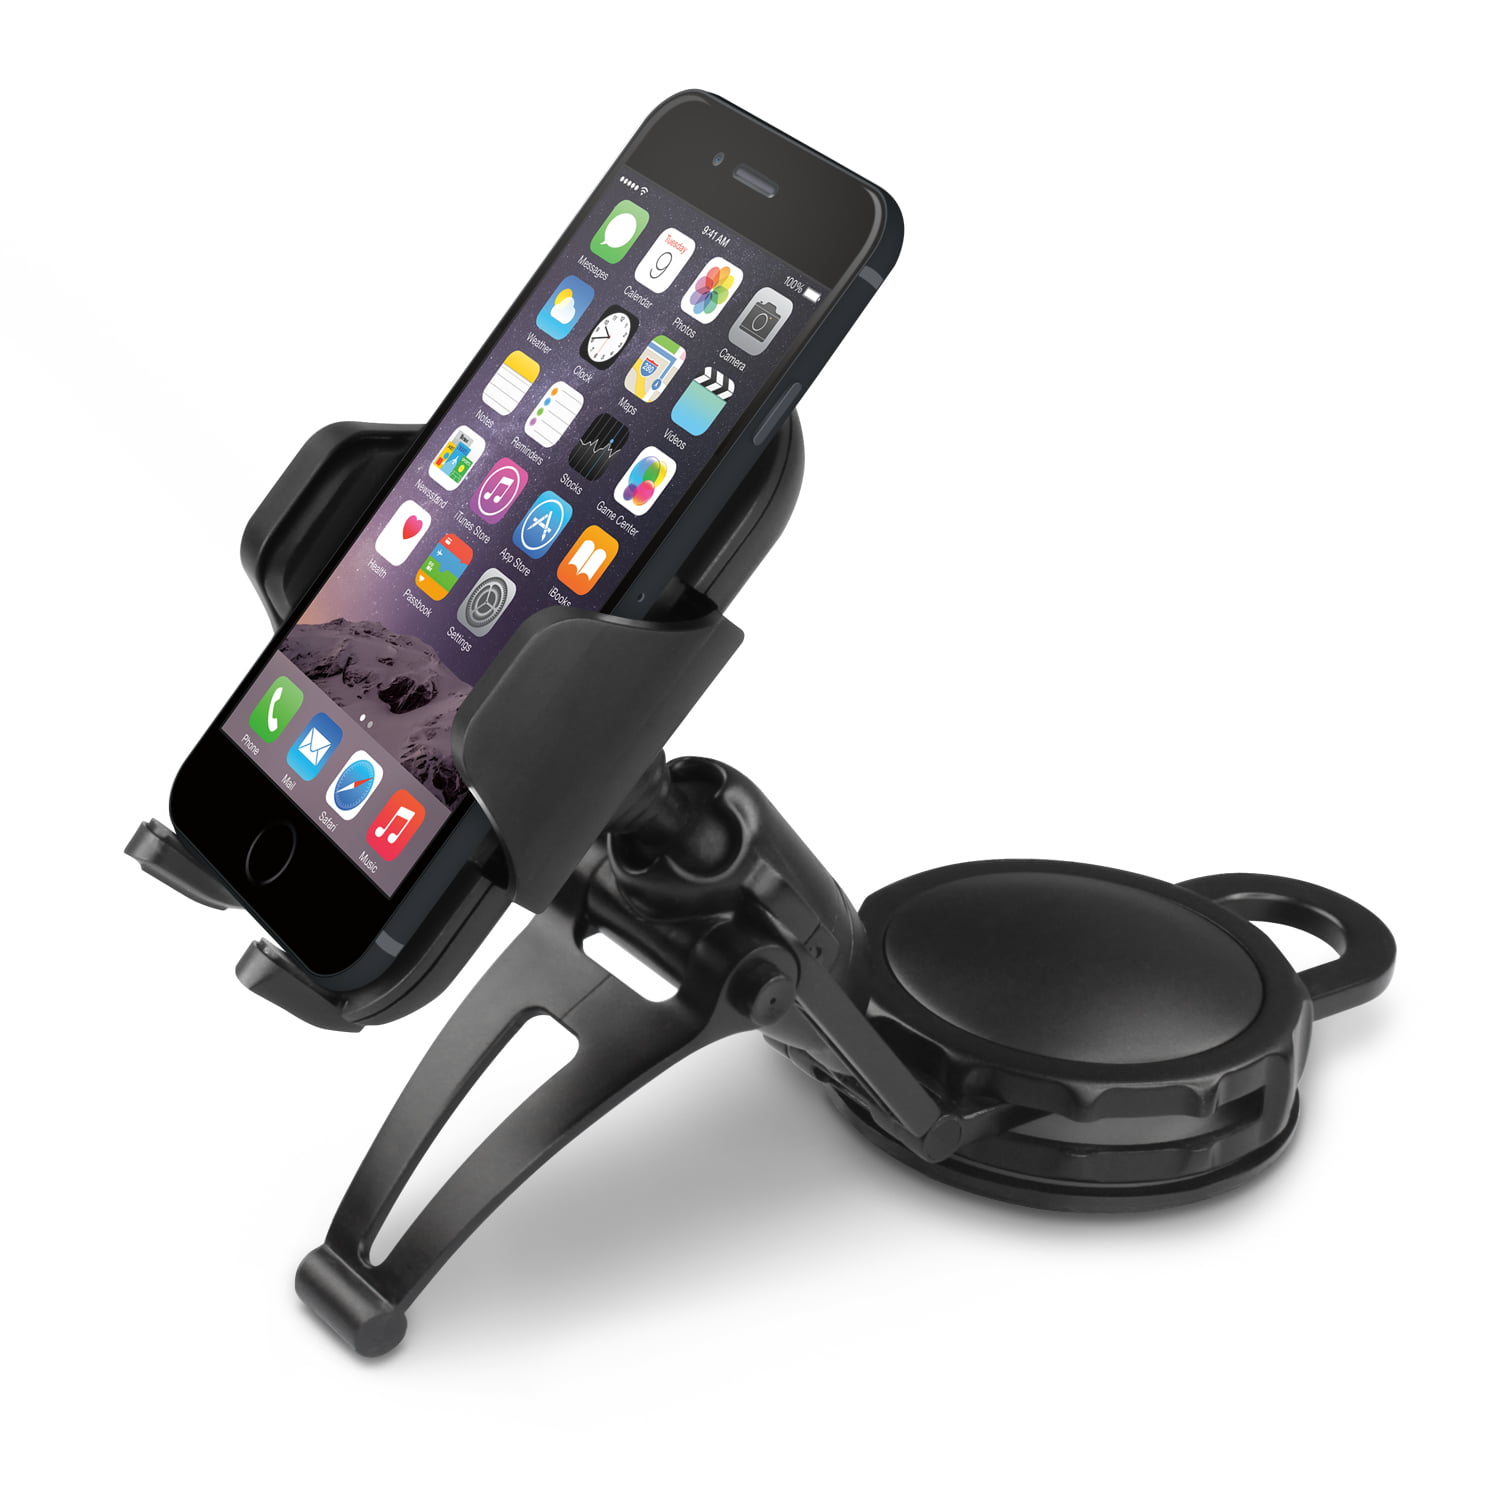 Cellet CD Slot Phone Holder Cradle Mount with One-Touch Design Compatible for Apple iPhone Xr,Xs Max,Xs,X,SE,8 Plus,8,7 Plus,7,6S Plus,6S,6 Plus,6,5S,5C,5,4S,4,3GS,3G,iPod Touch,iPod Nano and More 